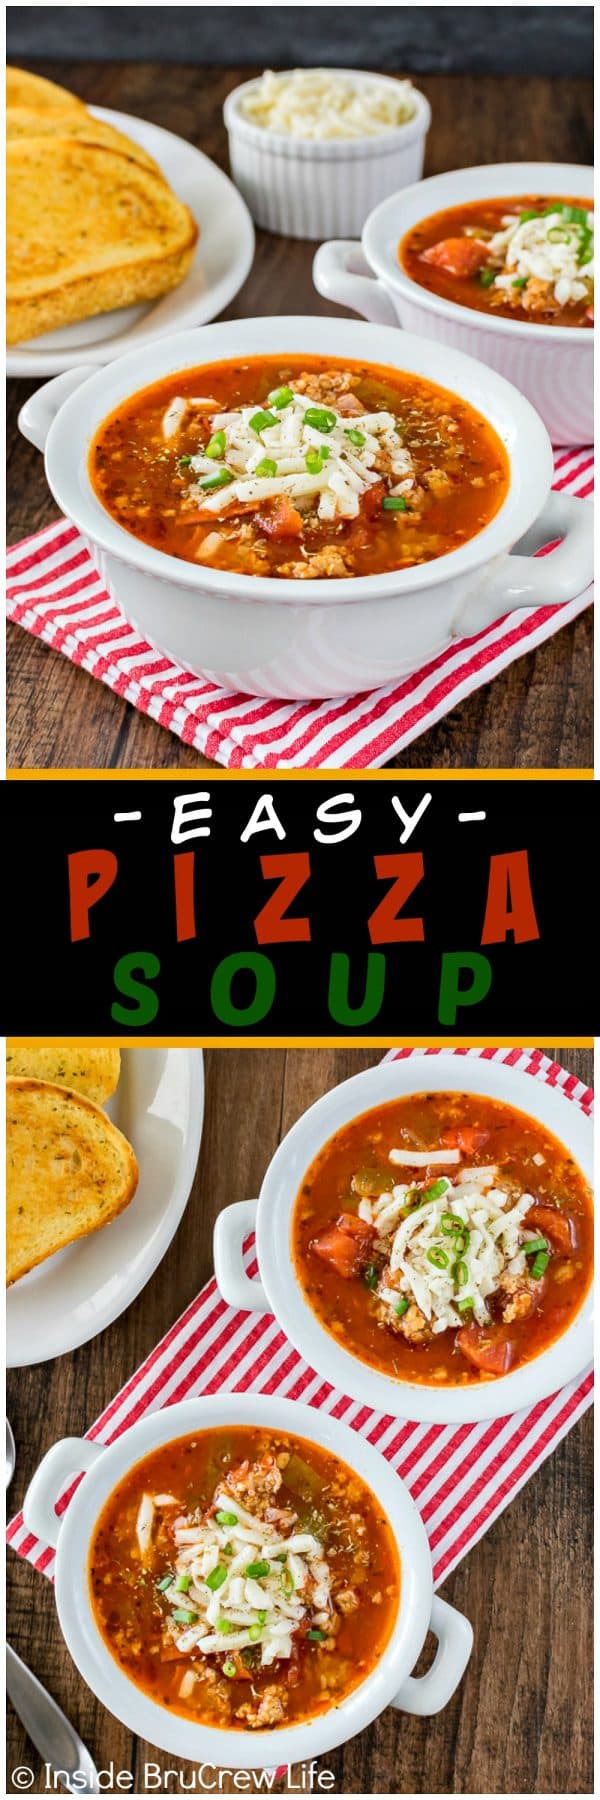 Easy Pizza Soup - this homemade soup is loaded with meat and veggies and can be ready in minutes. Great dinner recipe for busy or cold nights!